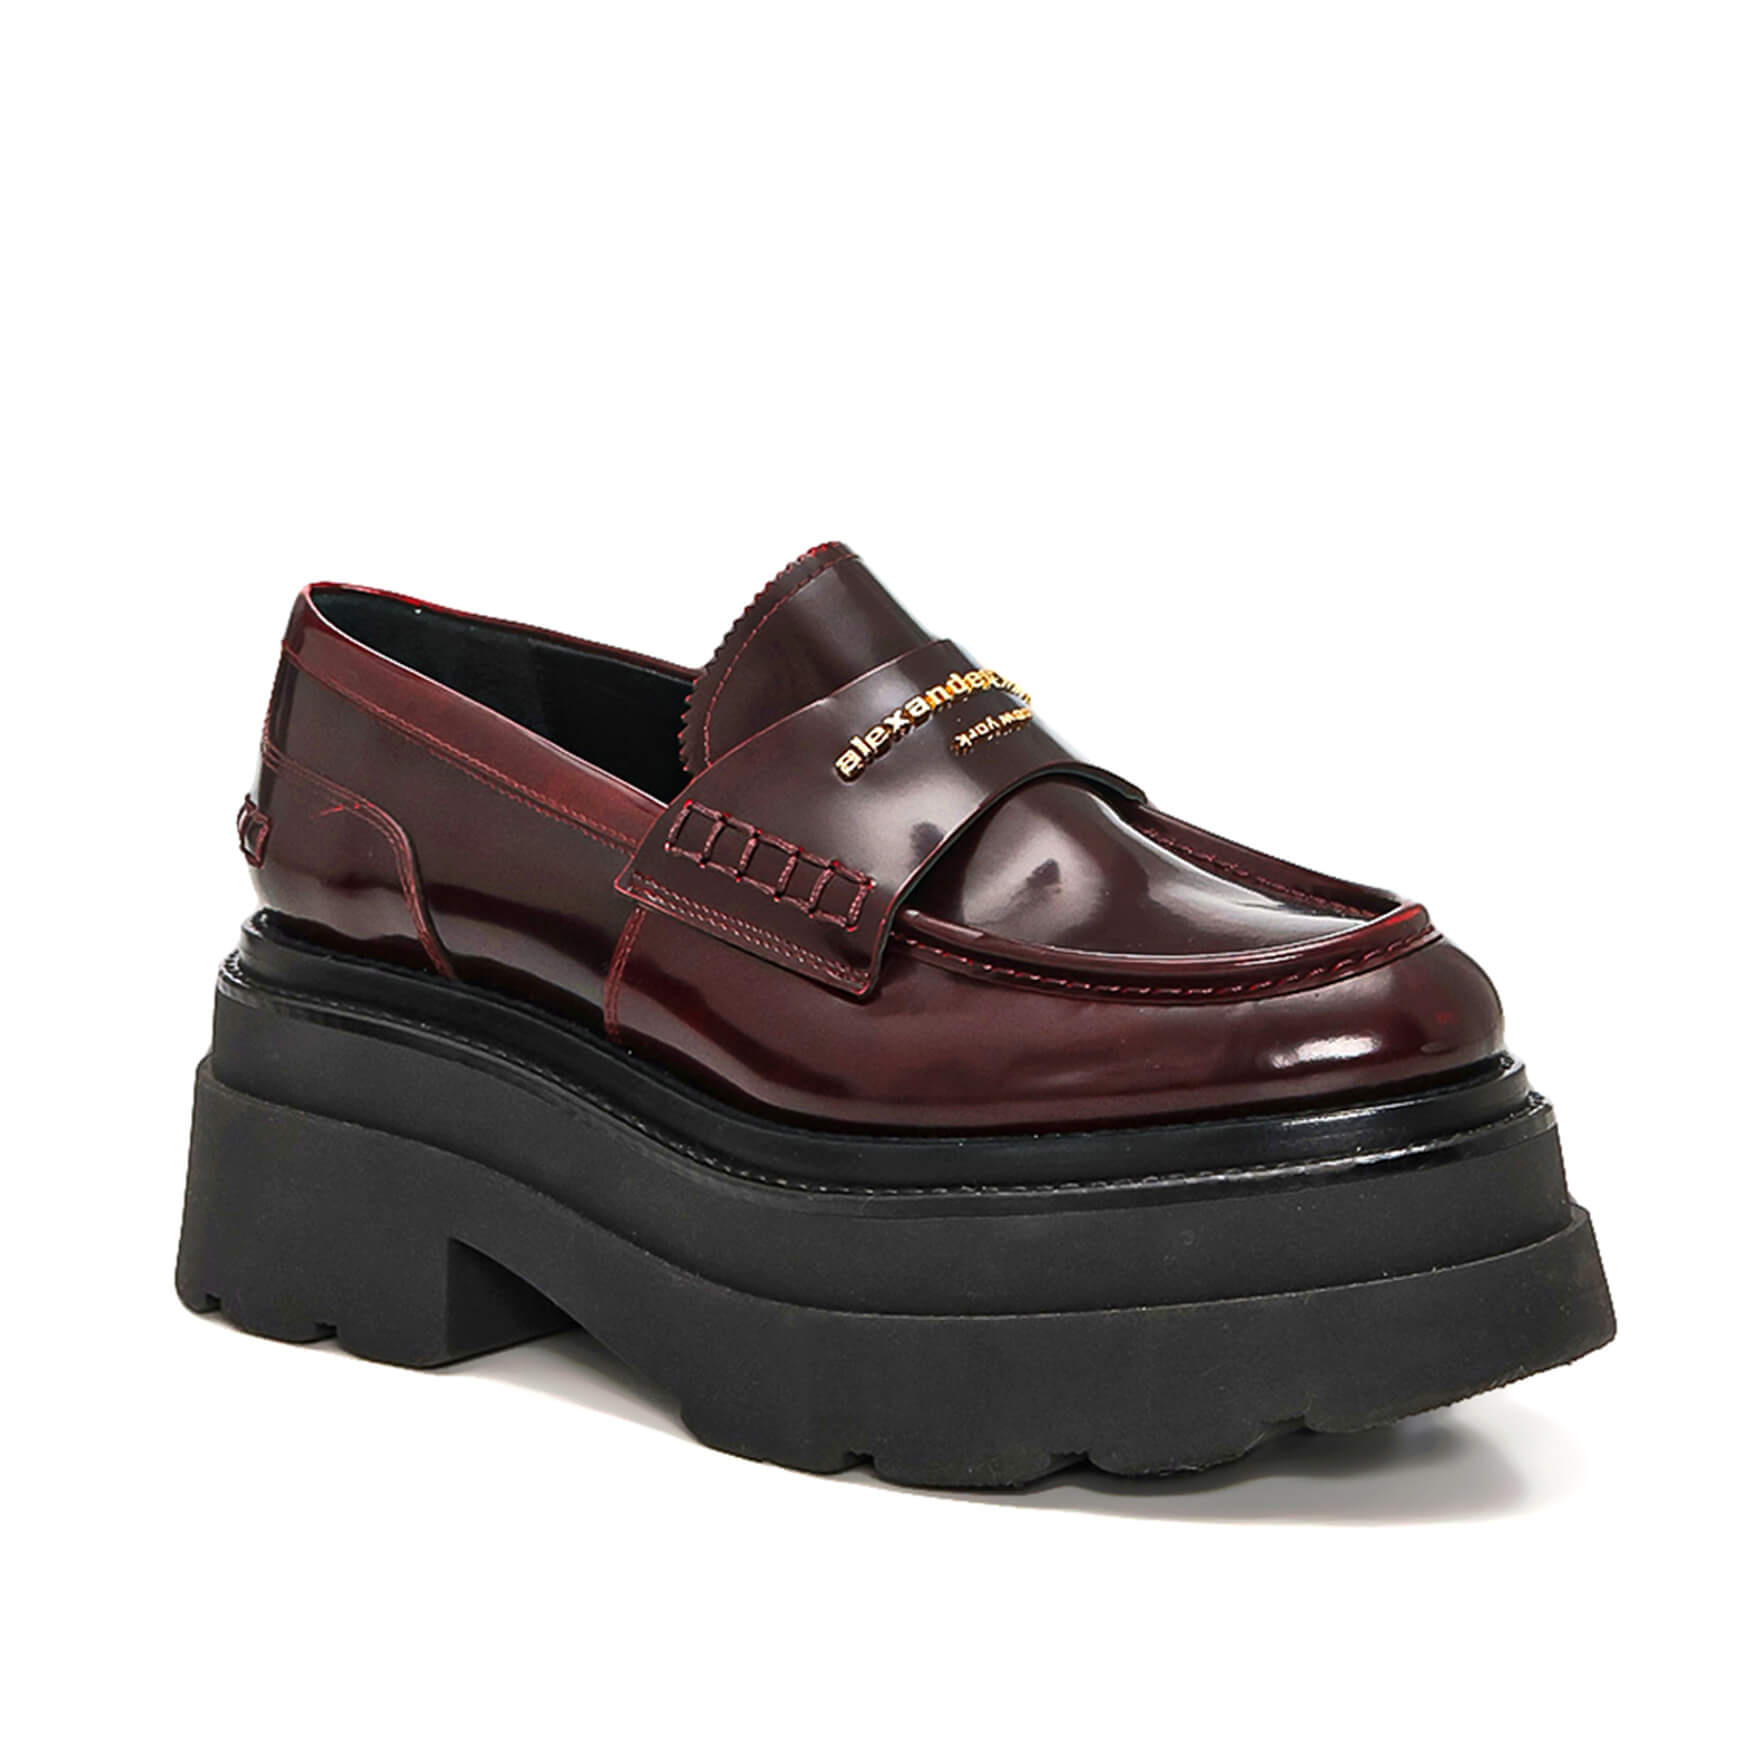 Alexander Wang - Bordeaux Patent Leather Loafers